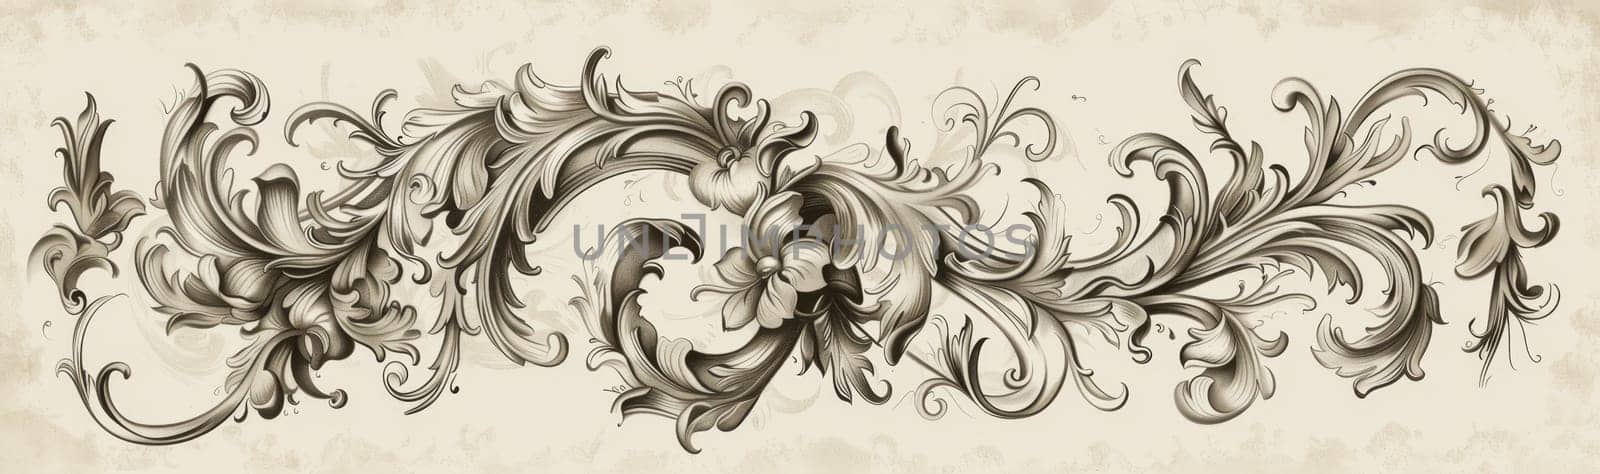 Monochrome swirls and floral patterns stretching across a dark background in a seamless design.. by sfinks